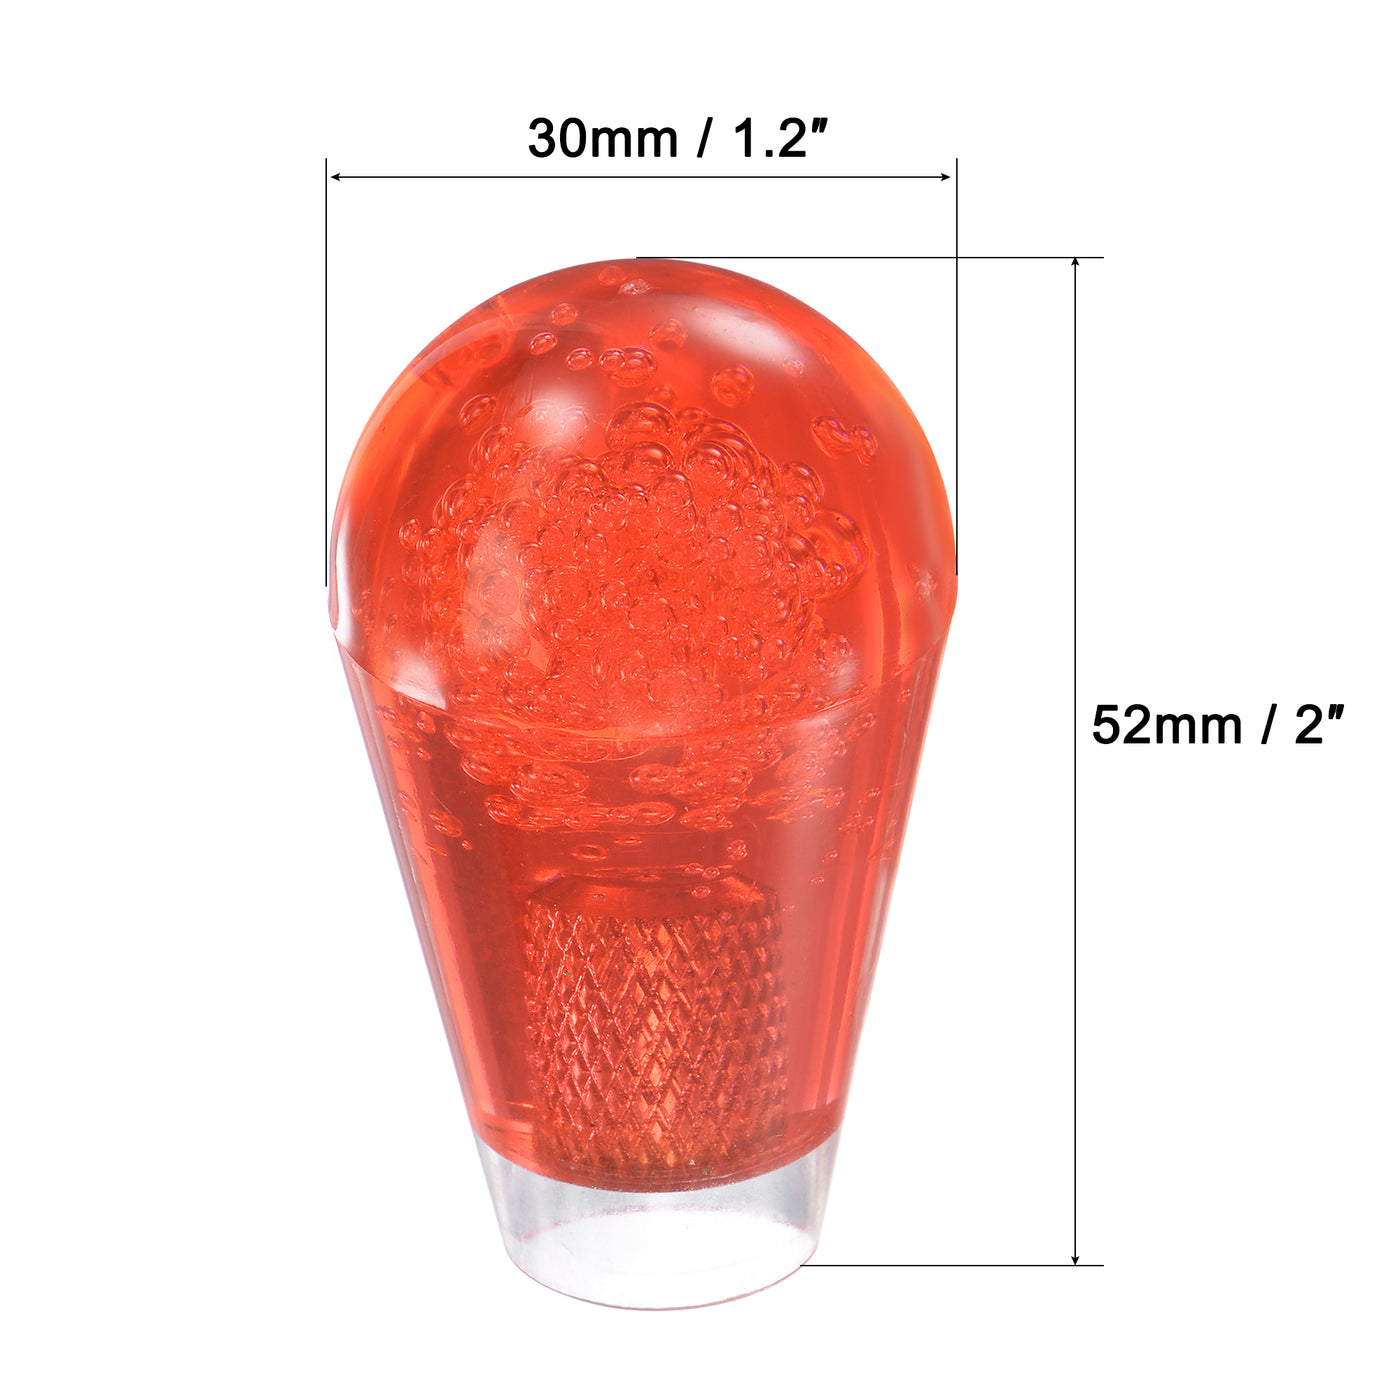 uxcell Uxcell Ellipse Oval Joystick Head Rocker Ball Top Handle Arcade Game Replacement Red